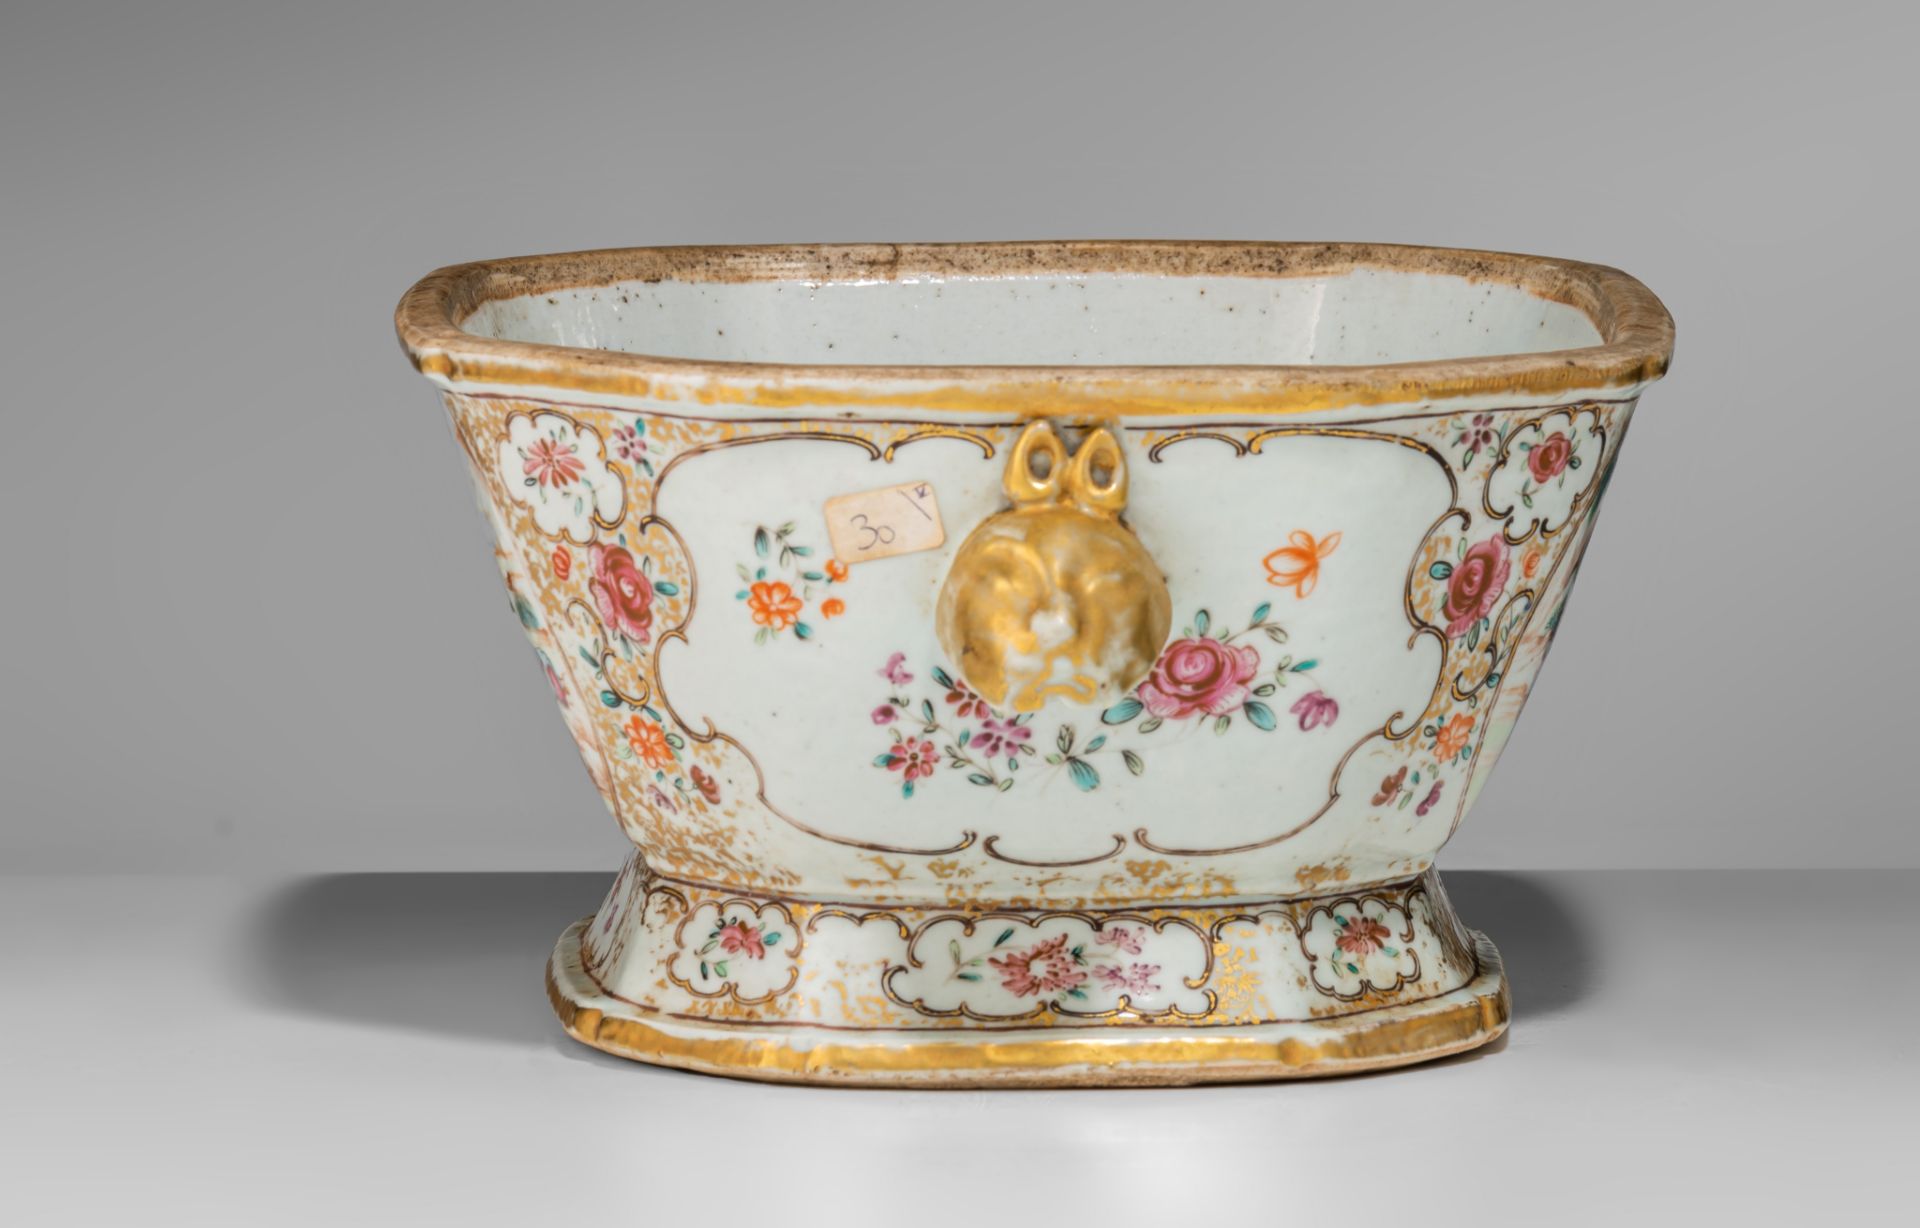 A collection of famille rose and gilt decorated export porcelain ware, 18thC, largest - H 12,5 - 34, - Image 9 of 20